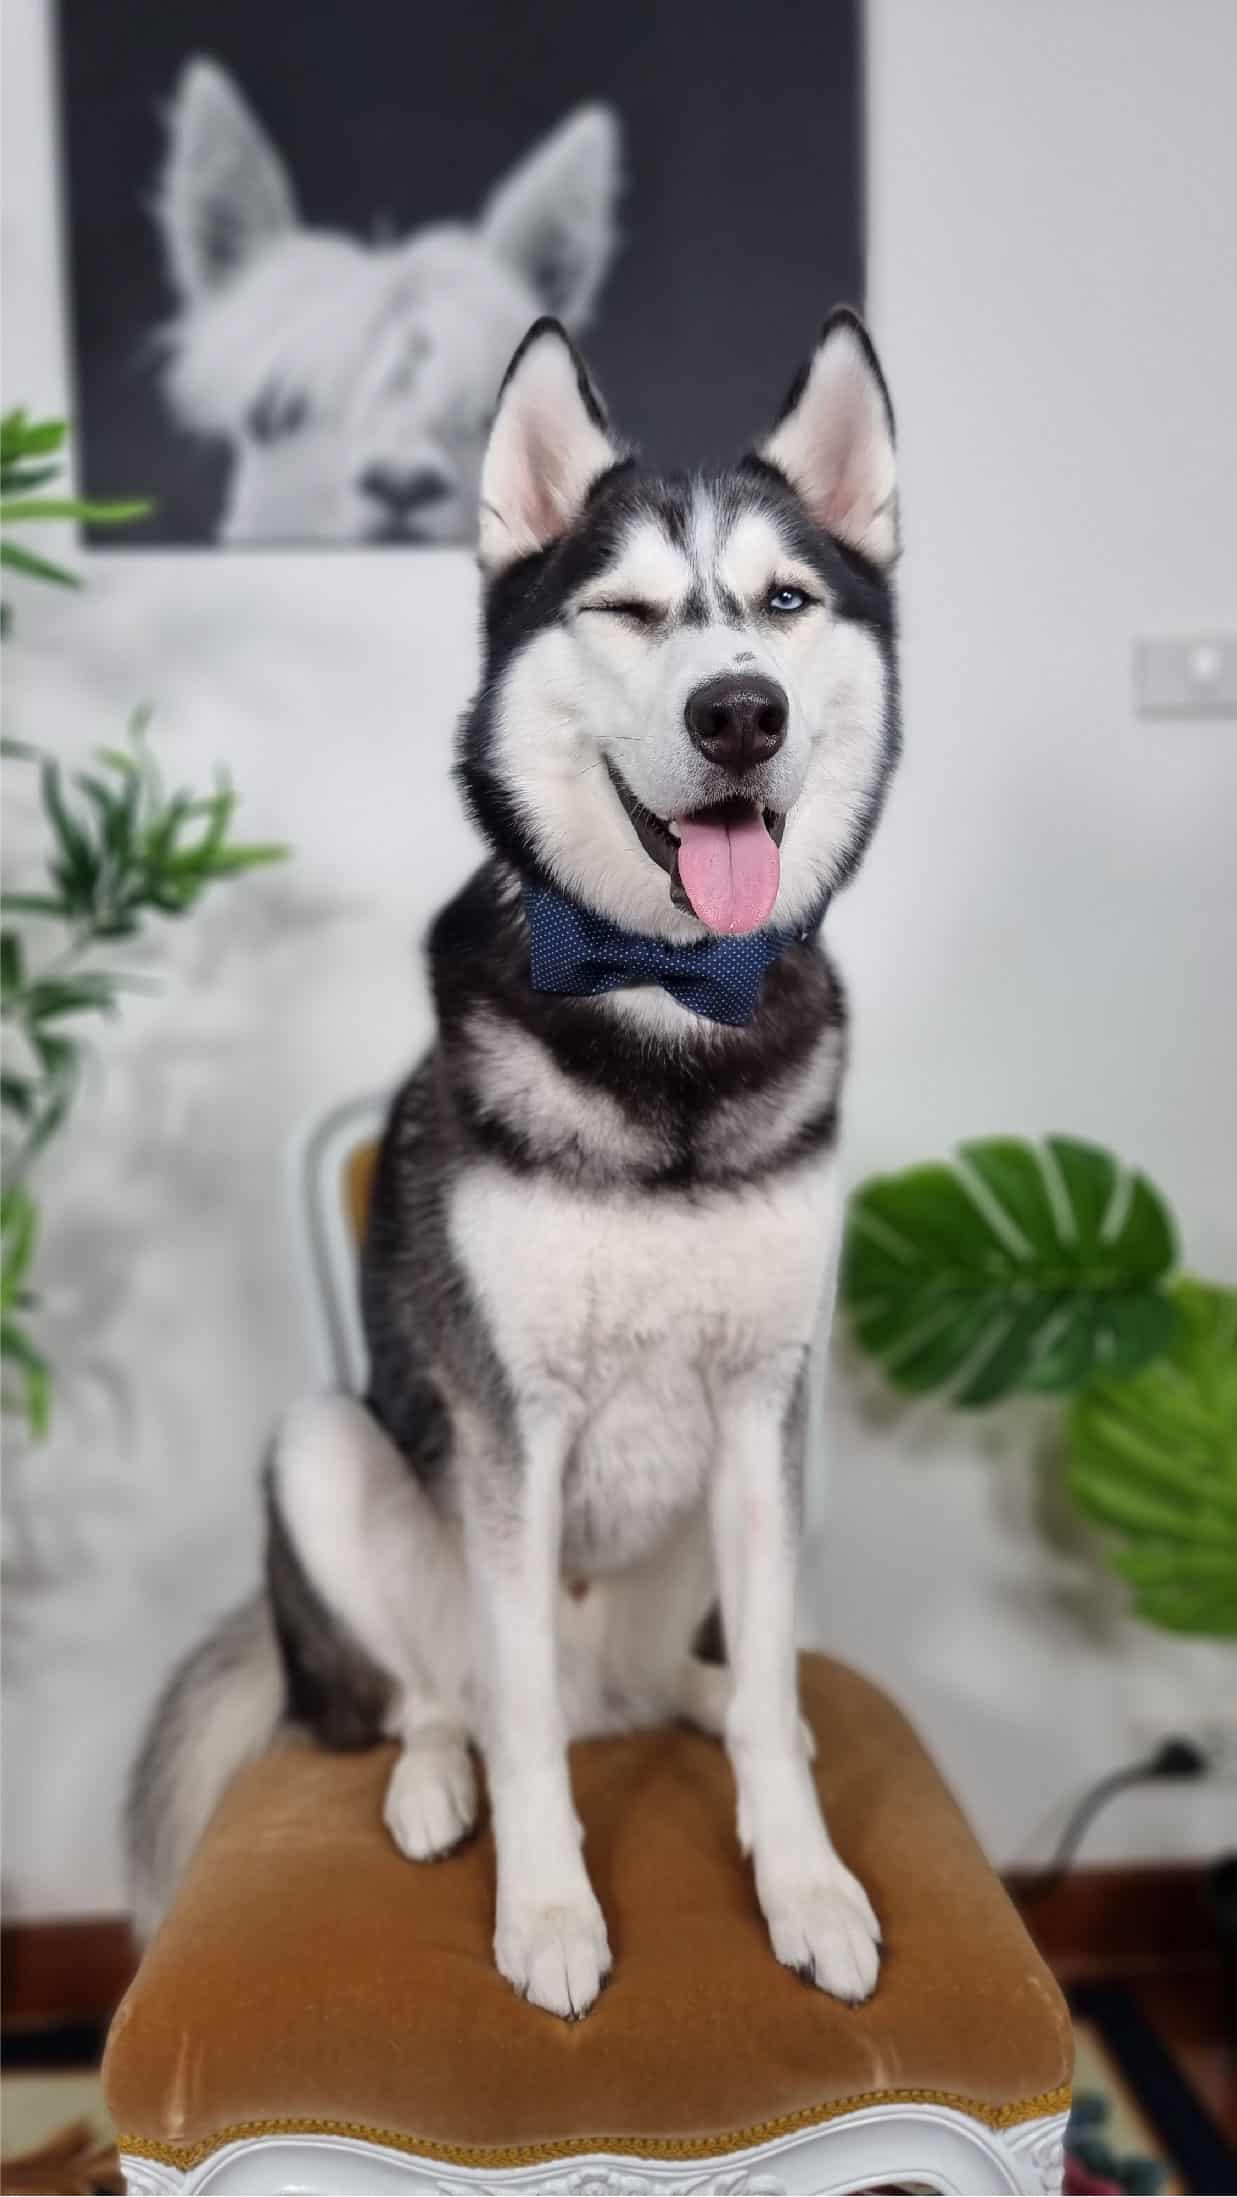 Jax, a Siberian Husky, winks at the camera while wearing a bow-tie..